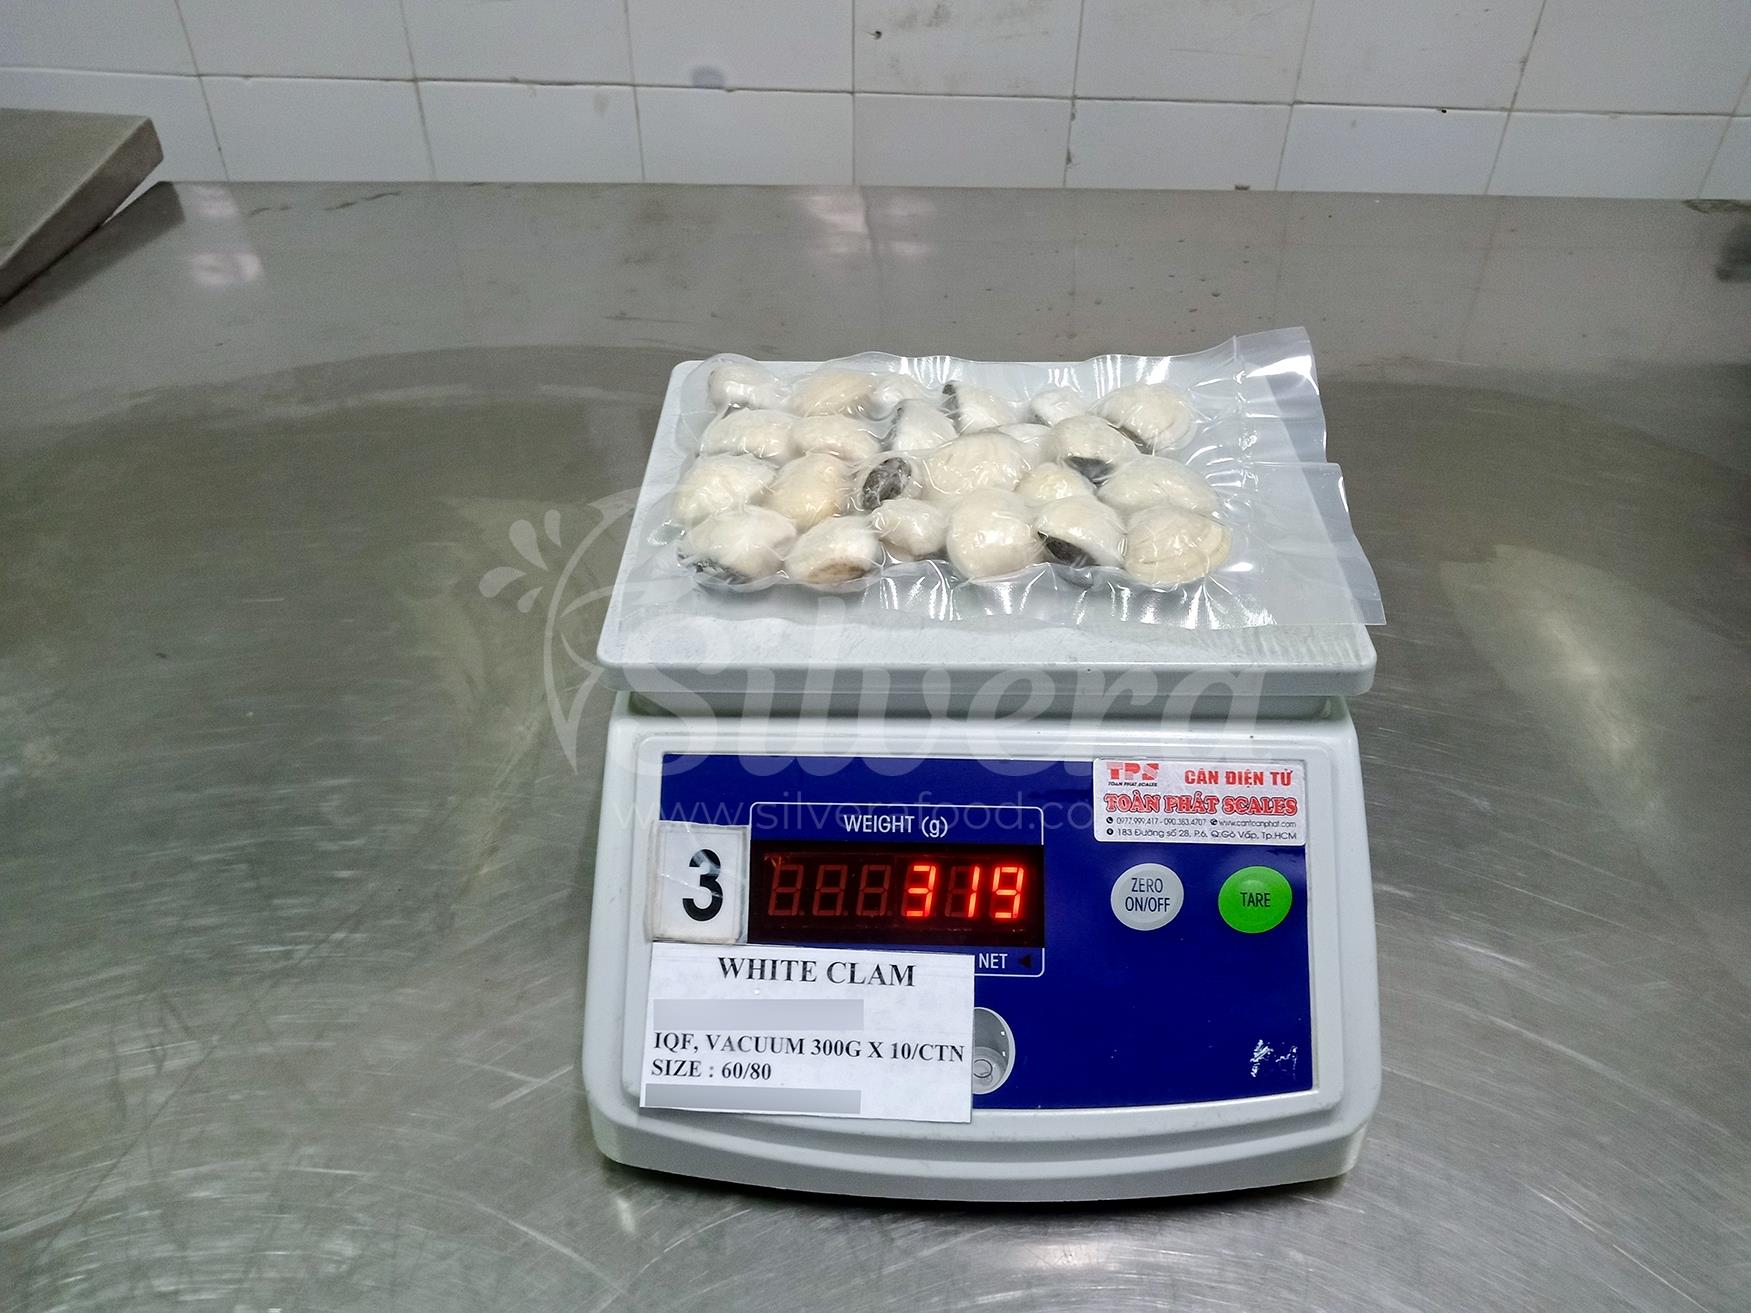 Vacuum packed bags of fully cooked whole white clams